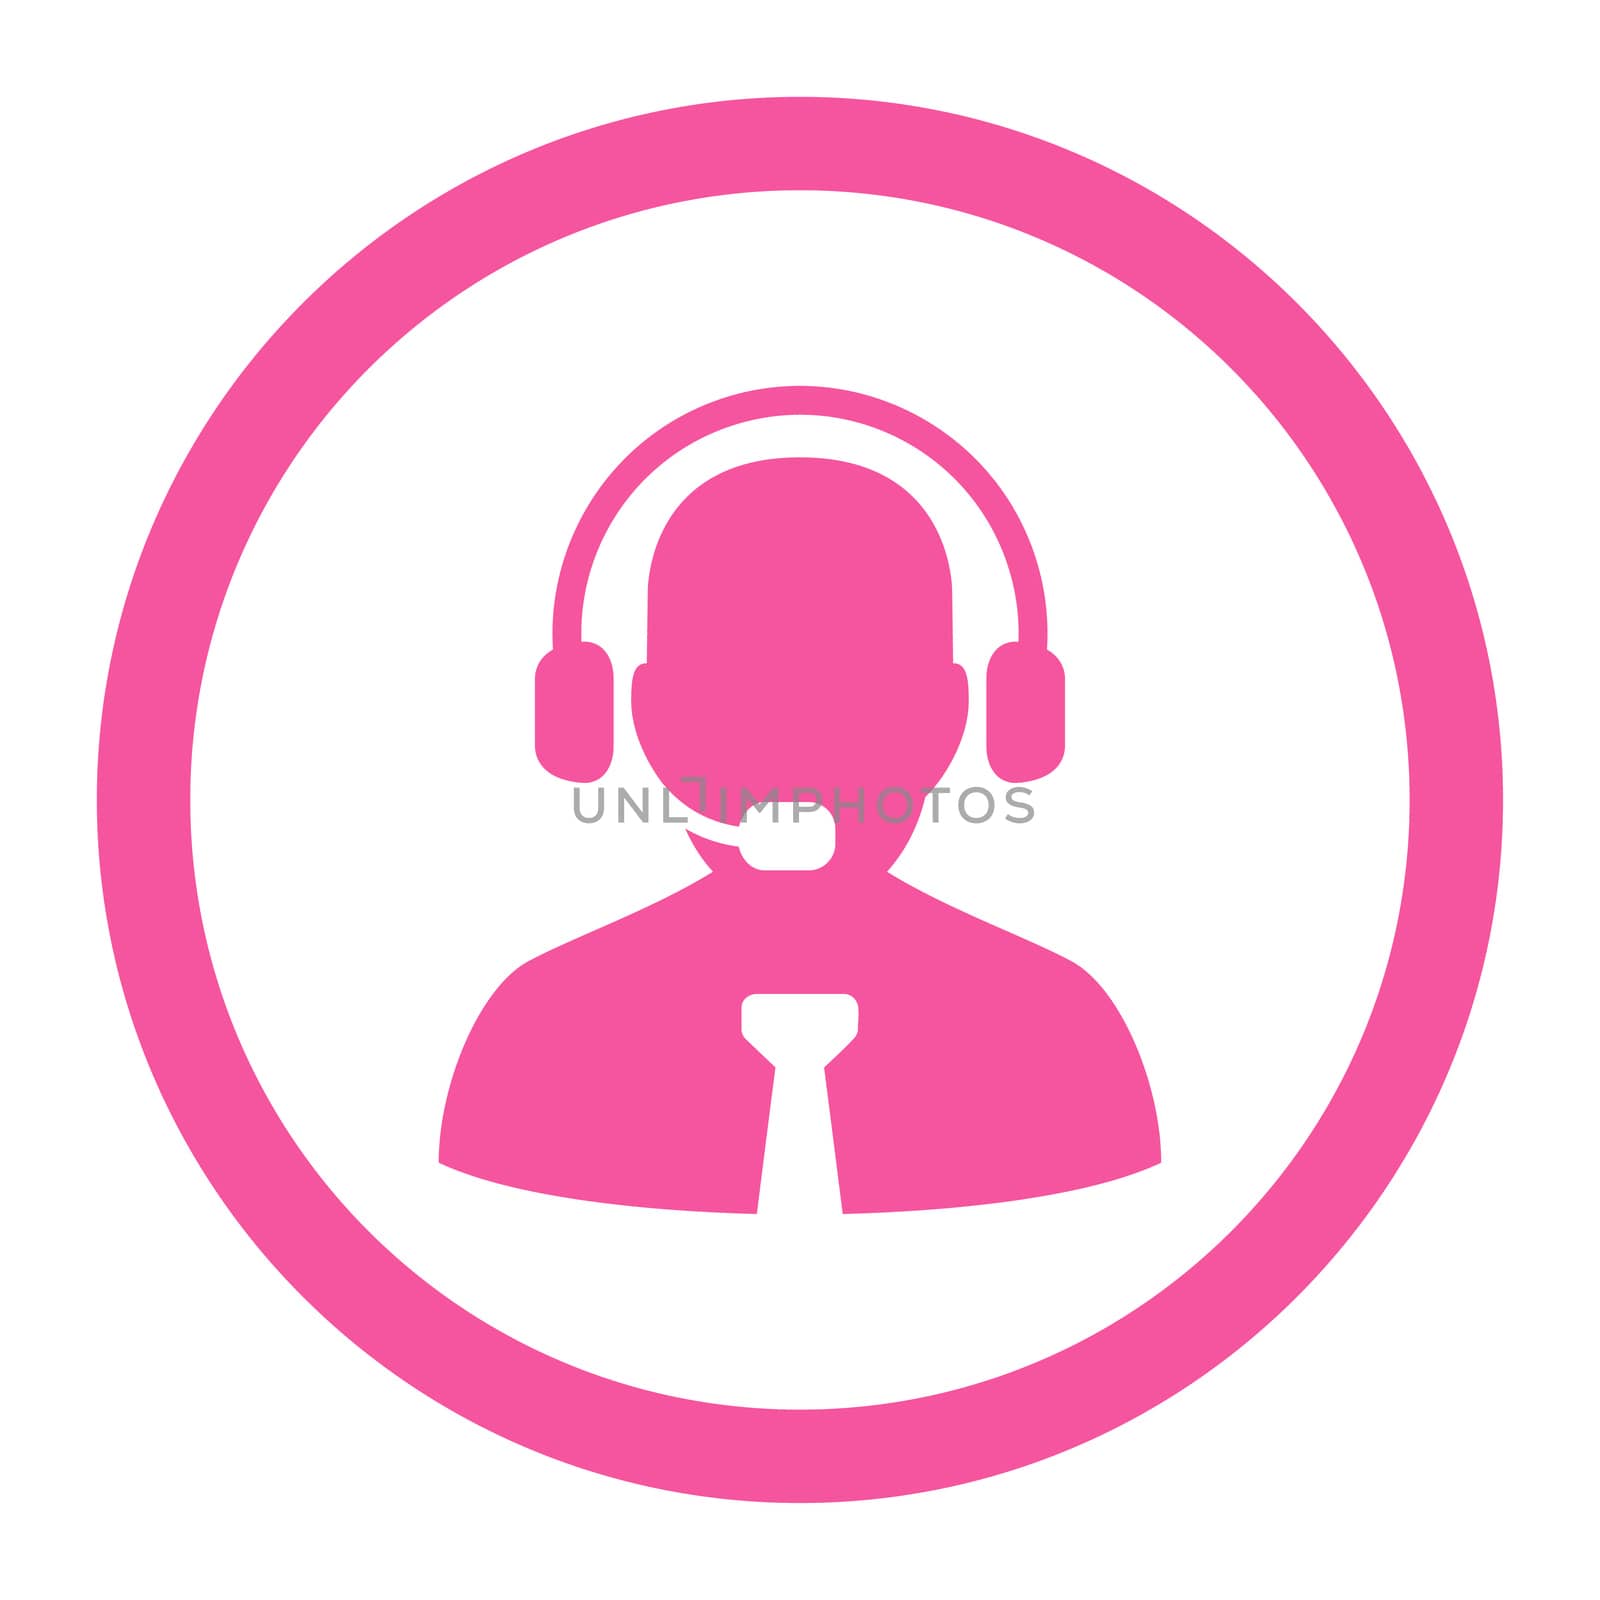 Support chat glyph icon. This rounded flat symbol is drawn with pink color on a white background.